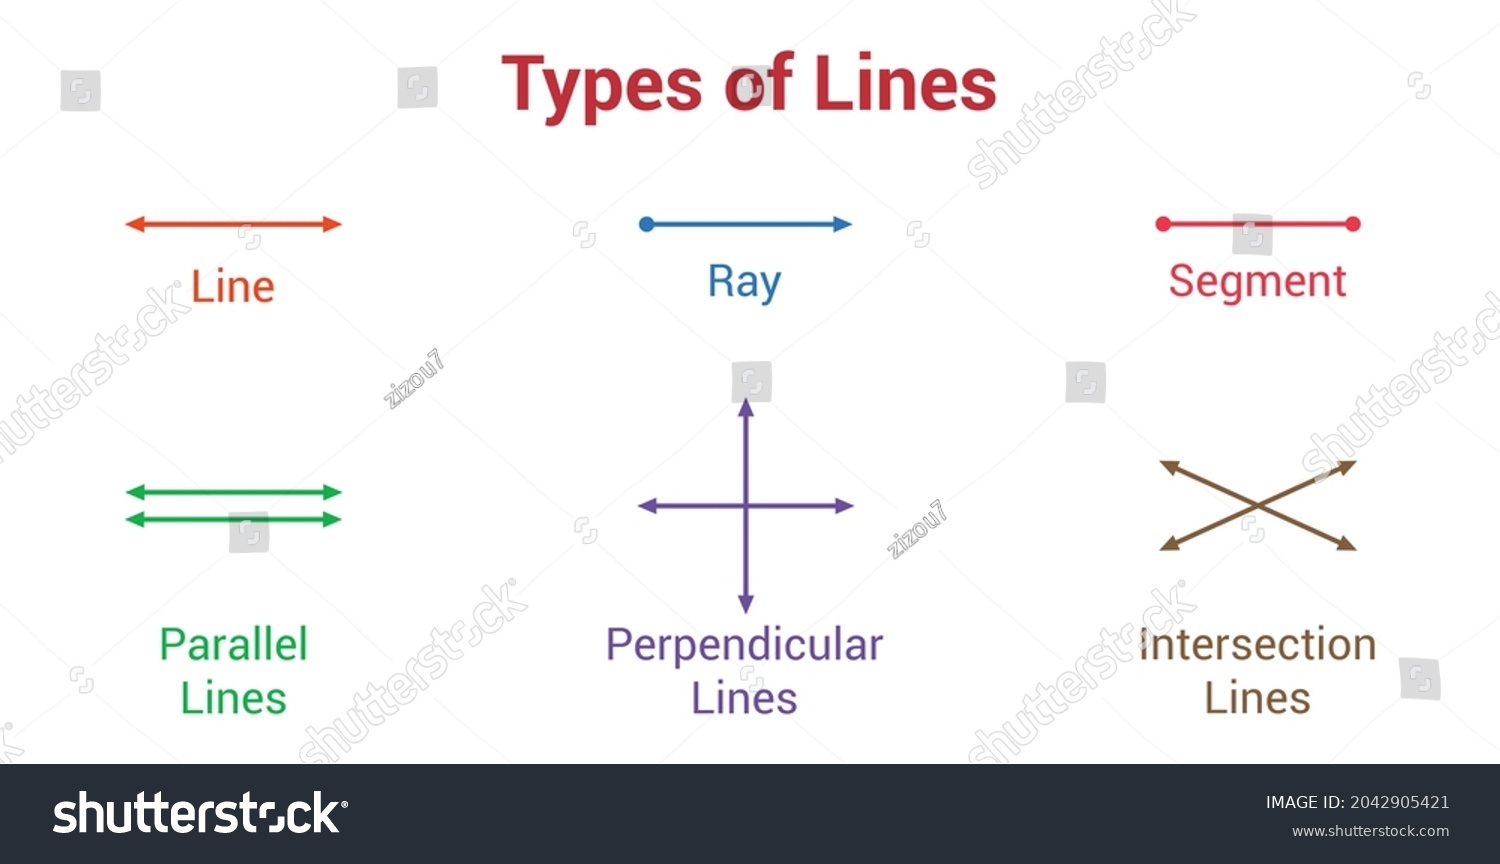 transversal of parallel lines - Year 5 - Quizizz